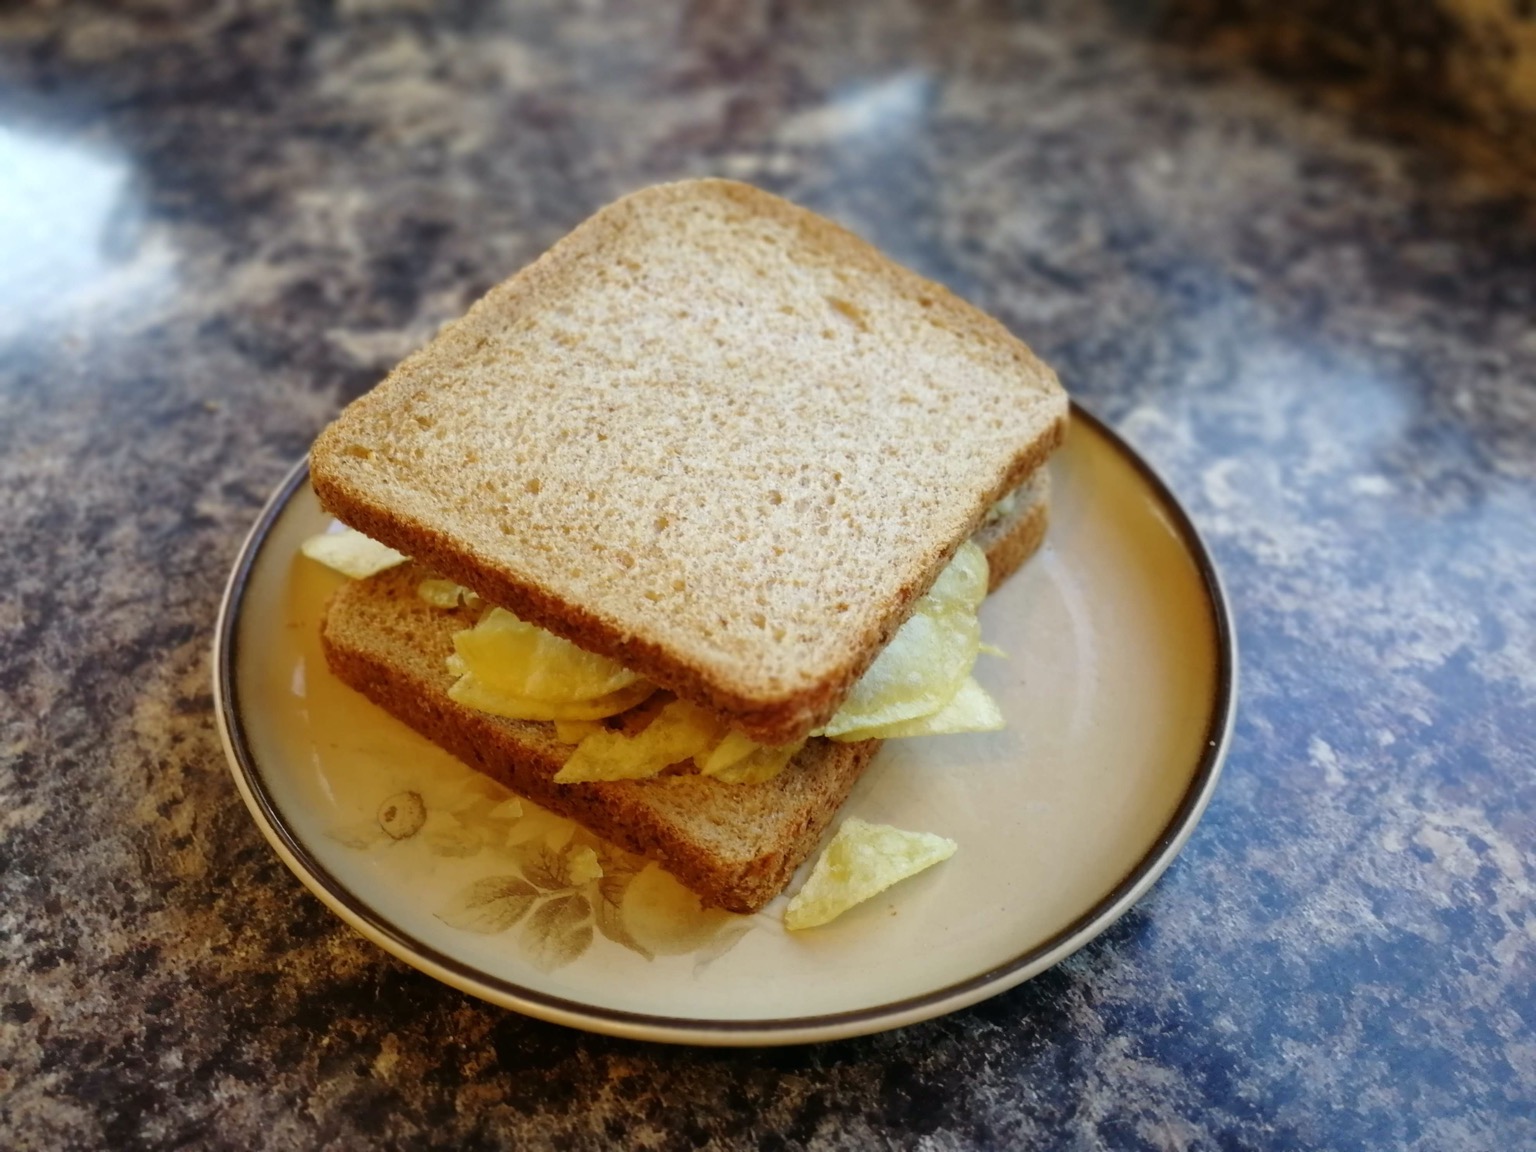 Brown crisp sandwich on a plate on a granite surface